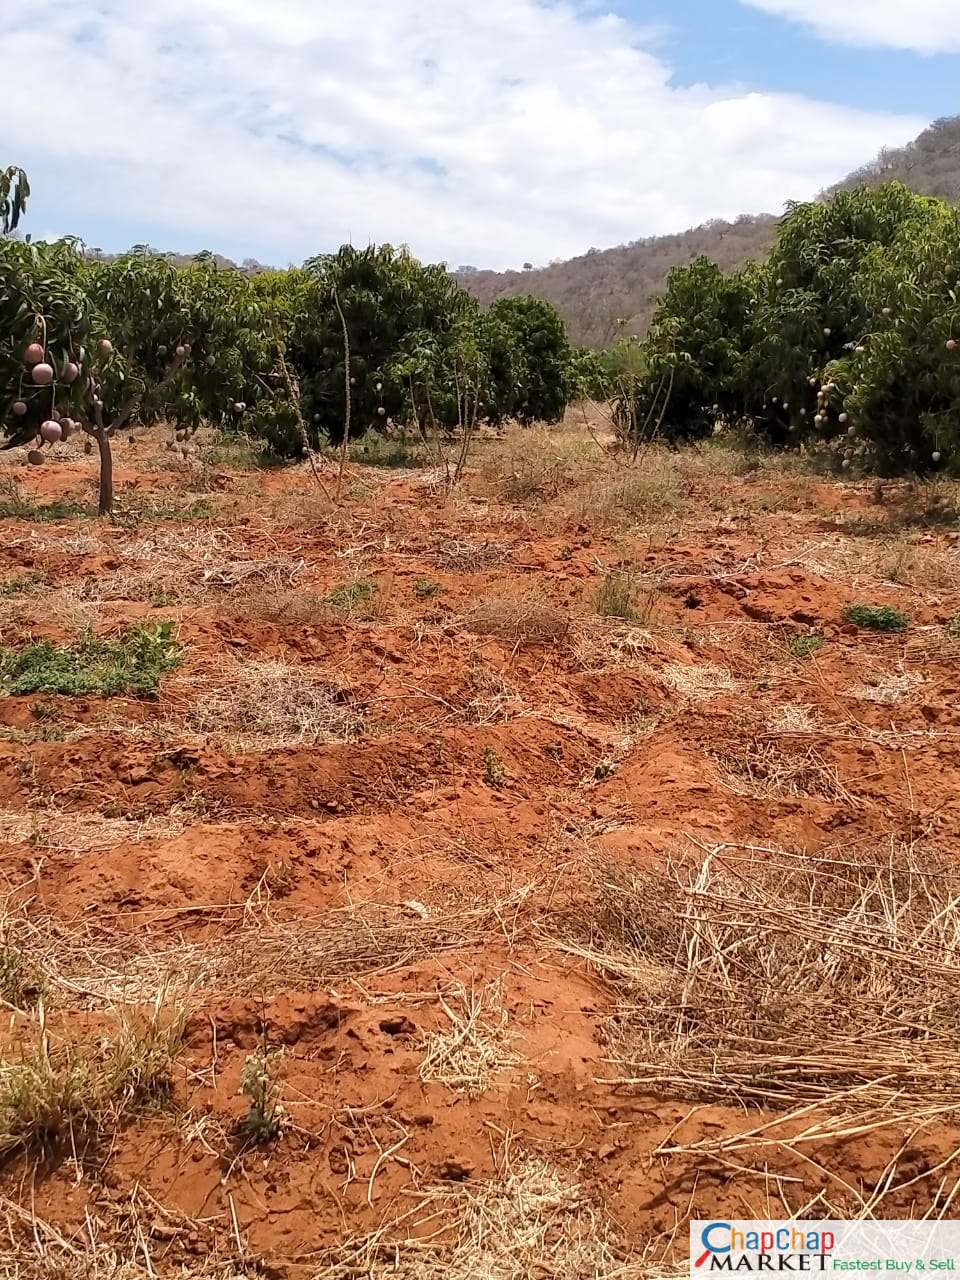 90 ACRES Land for Sale in kibwezi – Kitui road. CLEANEST CHEAPEST DEAL!